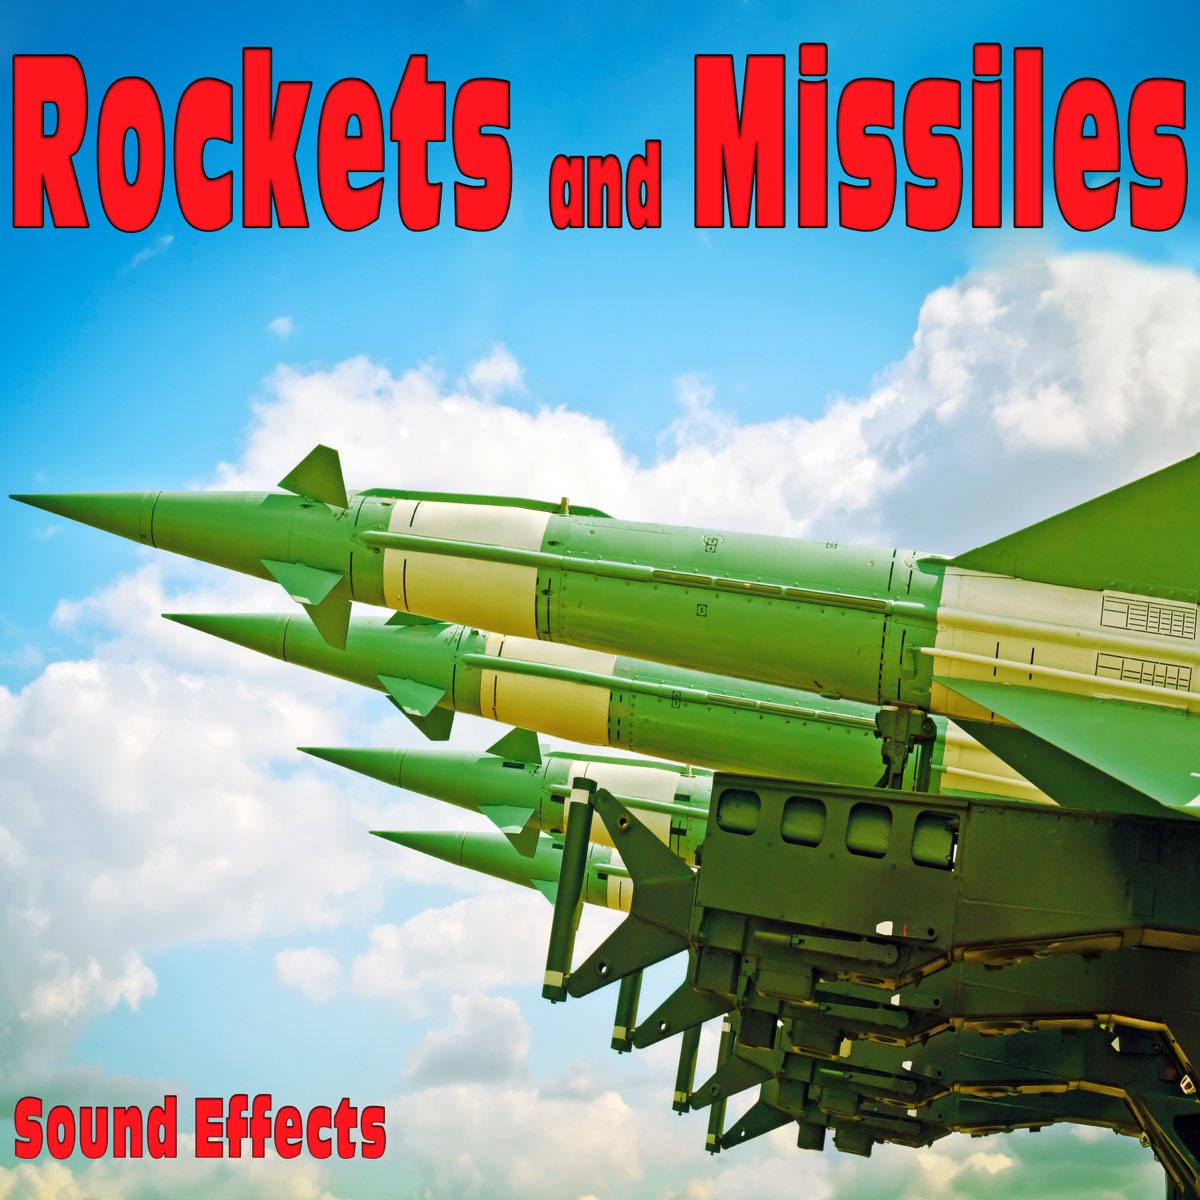 Rockets and Missiles Sound Effects - Album by Sound Ideas - Apple Music